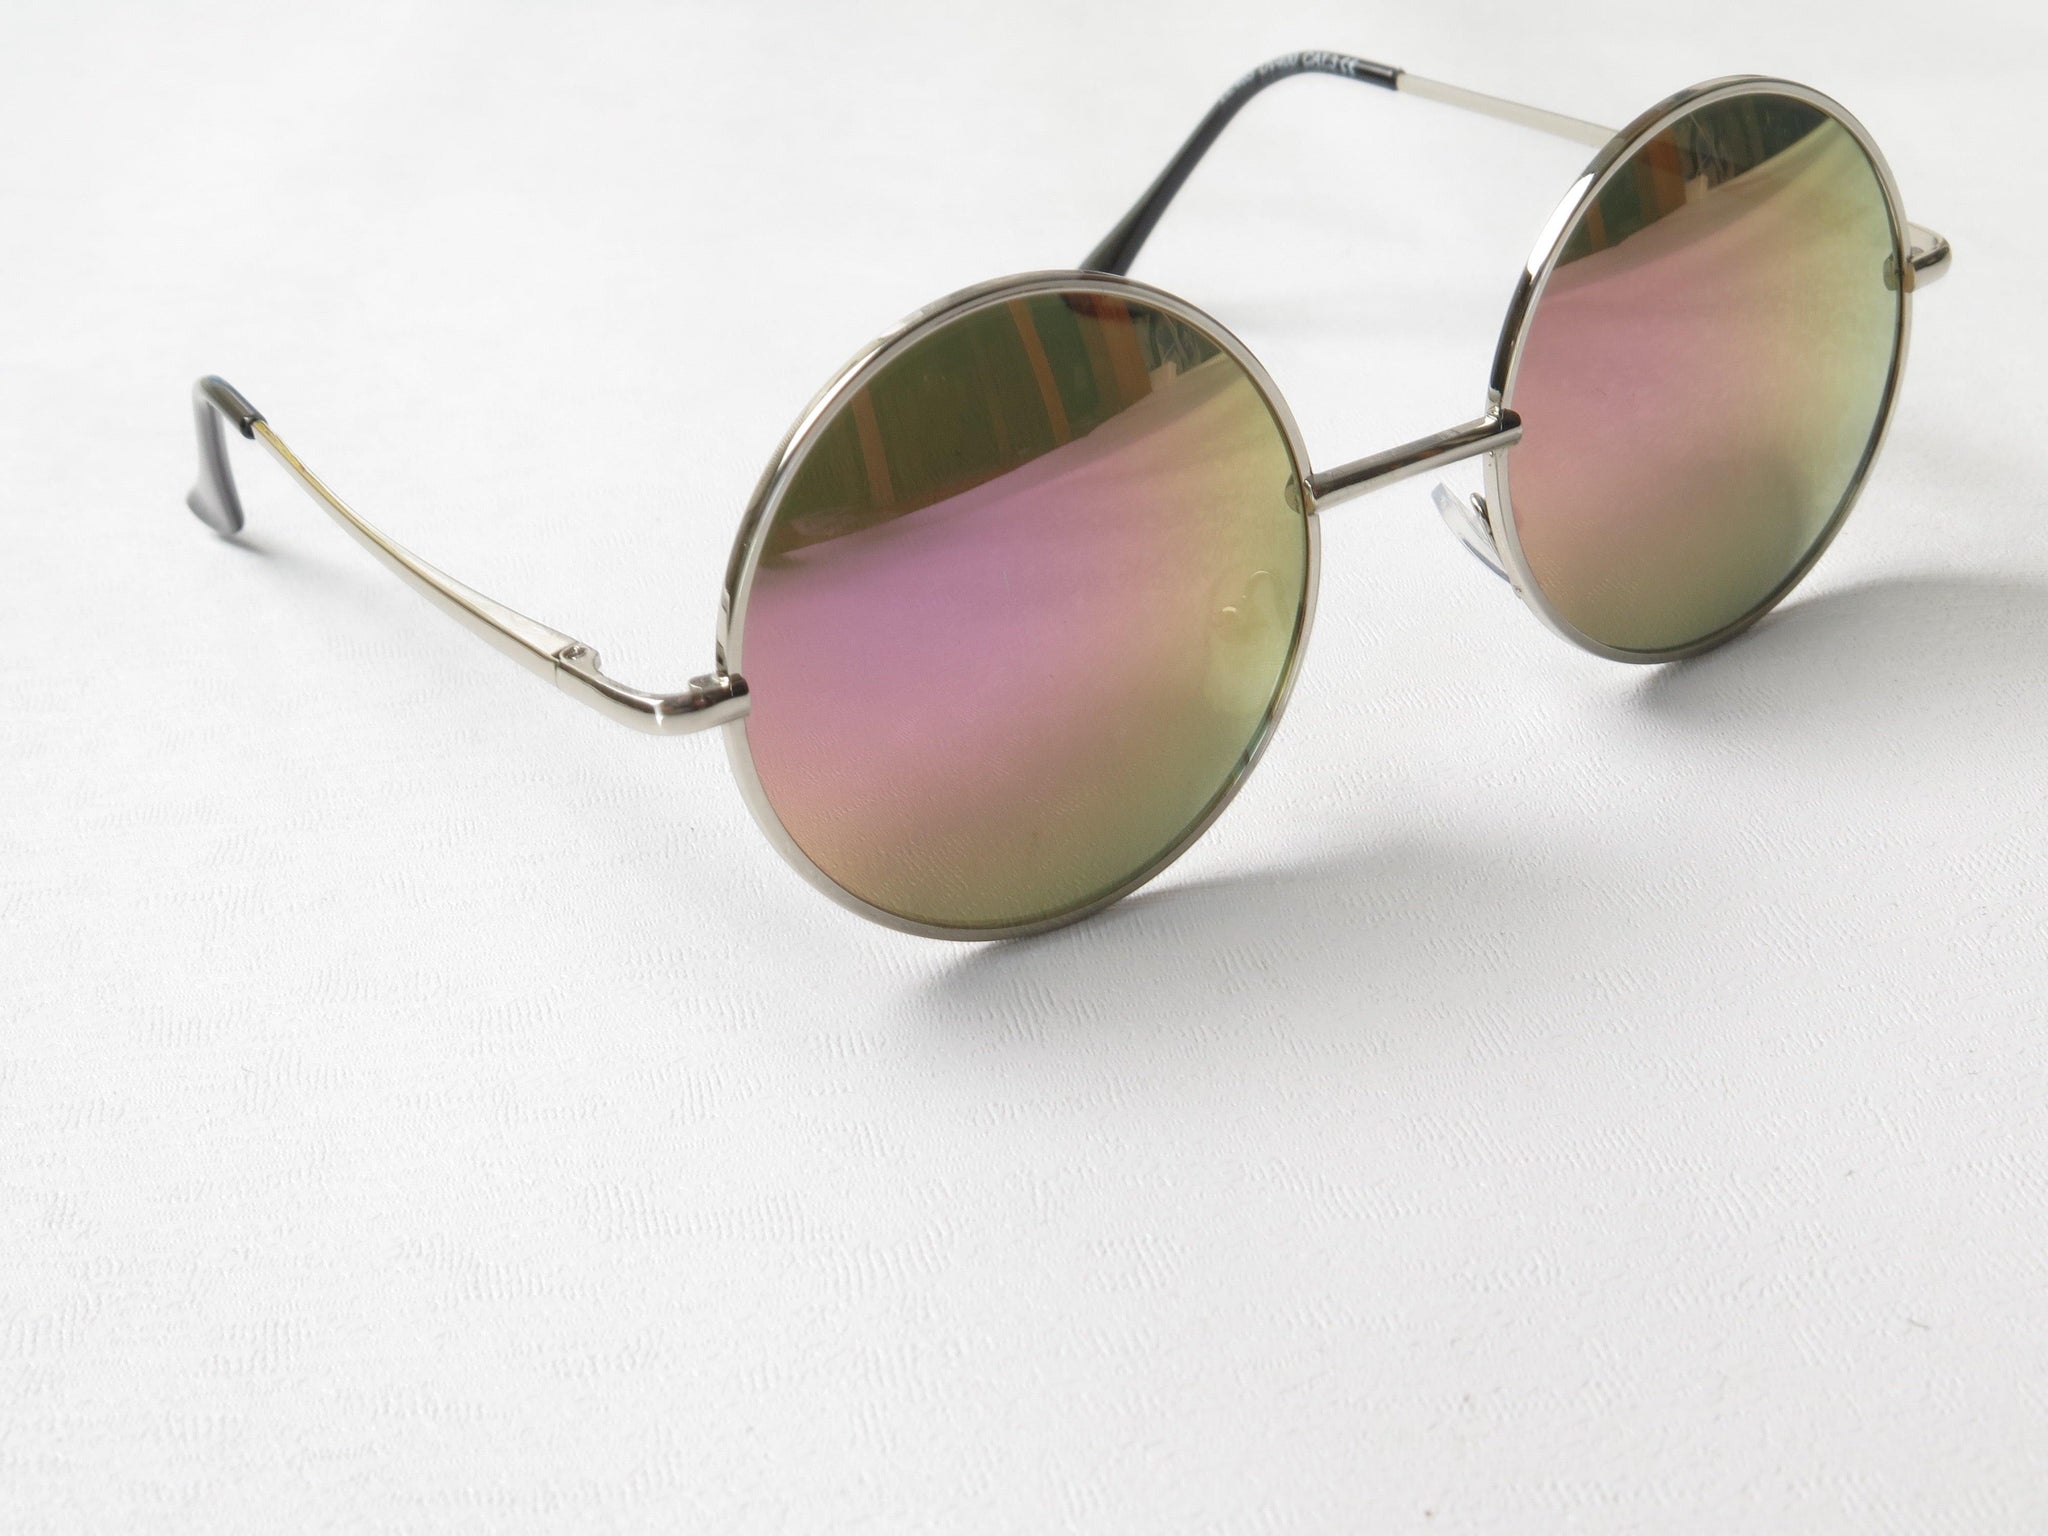 Lennon Mirrored Sunglasses With Different Coloured Lenses New - The Harlequin